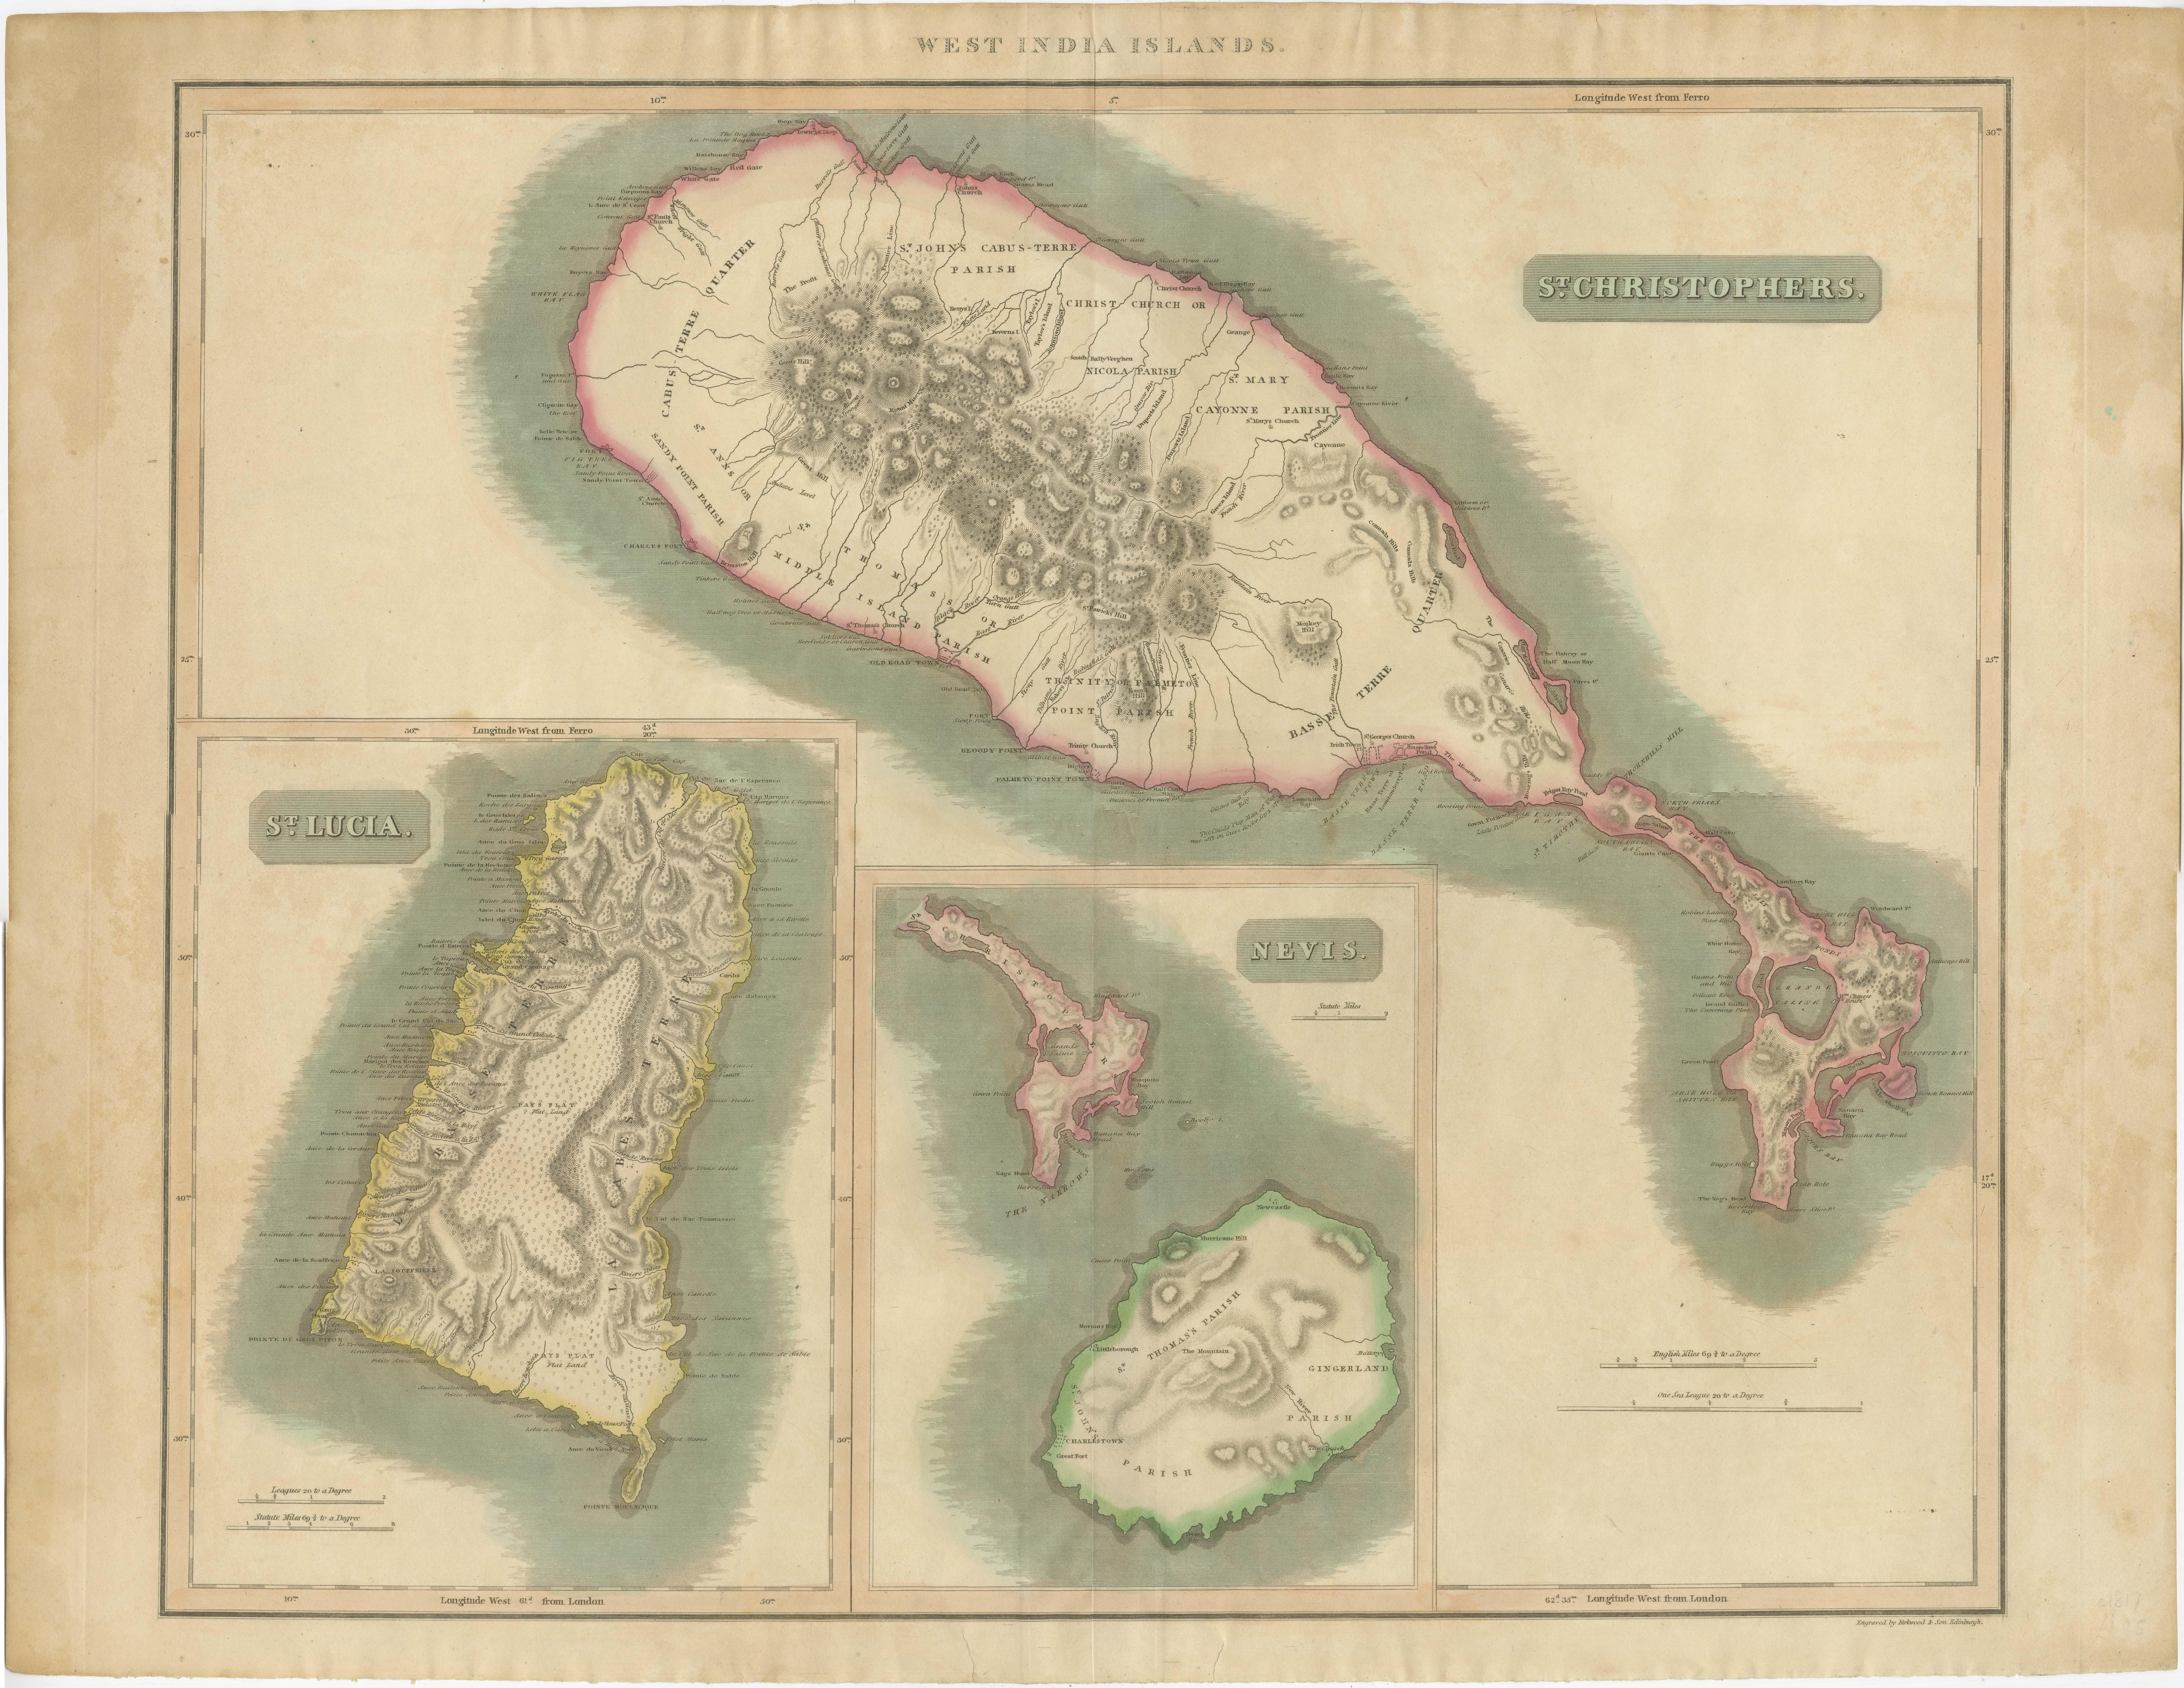 Paper 1817 John Thomson's Handcolored Antique Map of St. Kitts, Nevis, and St. Lucia  For Sale